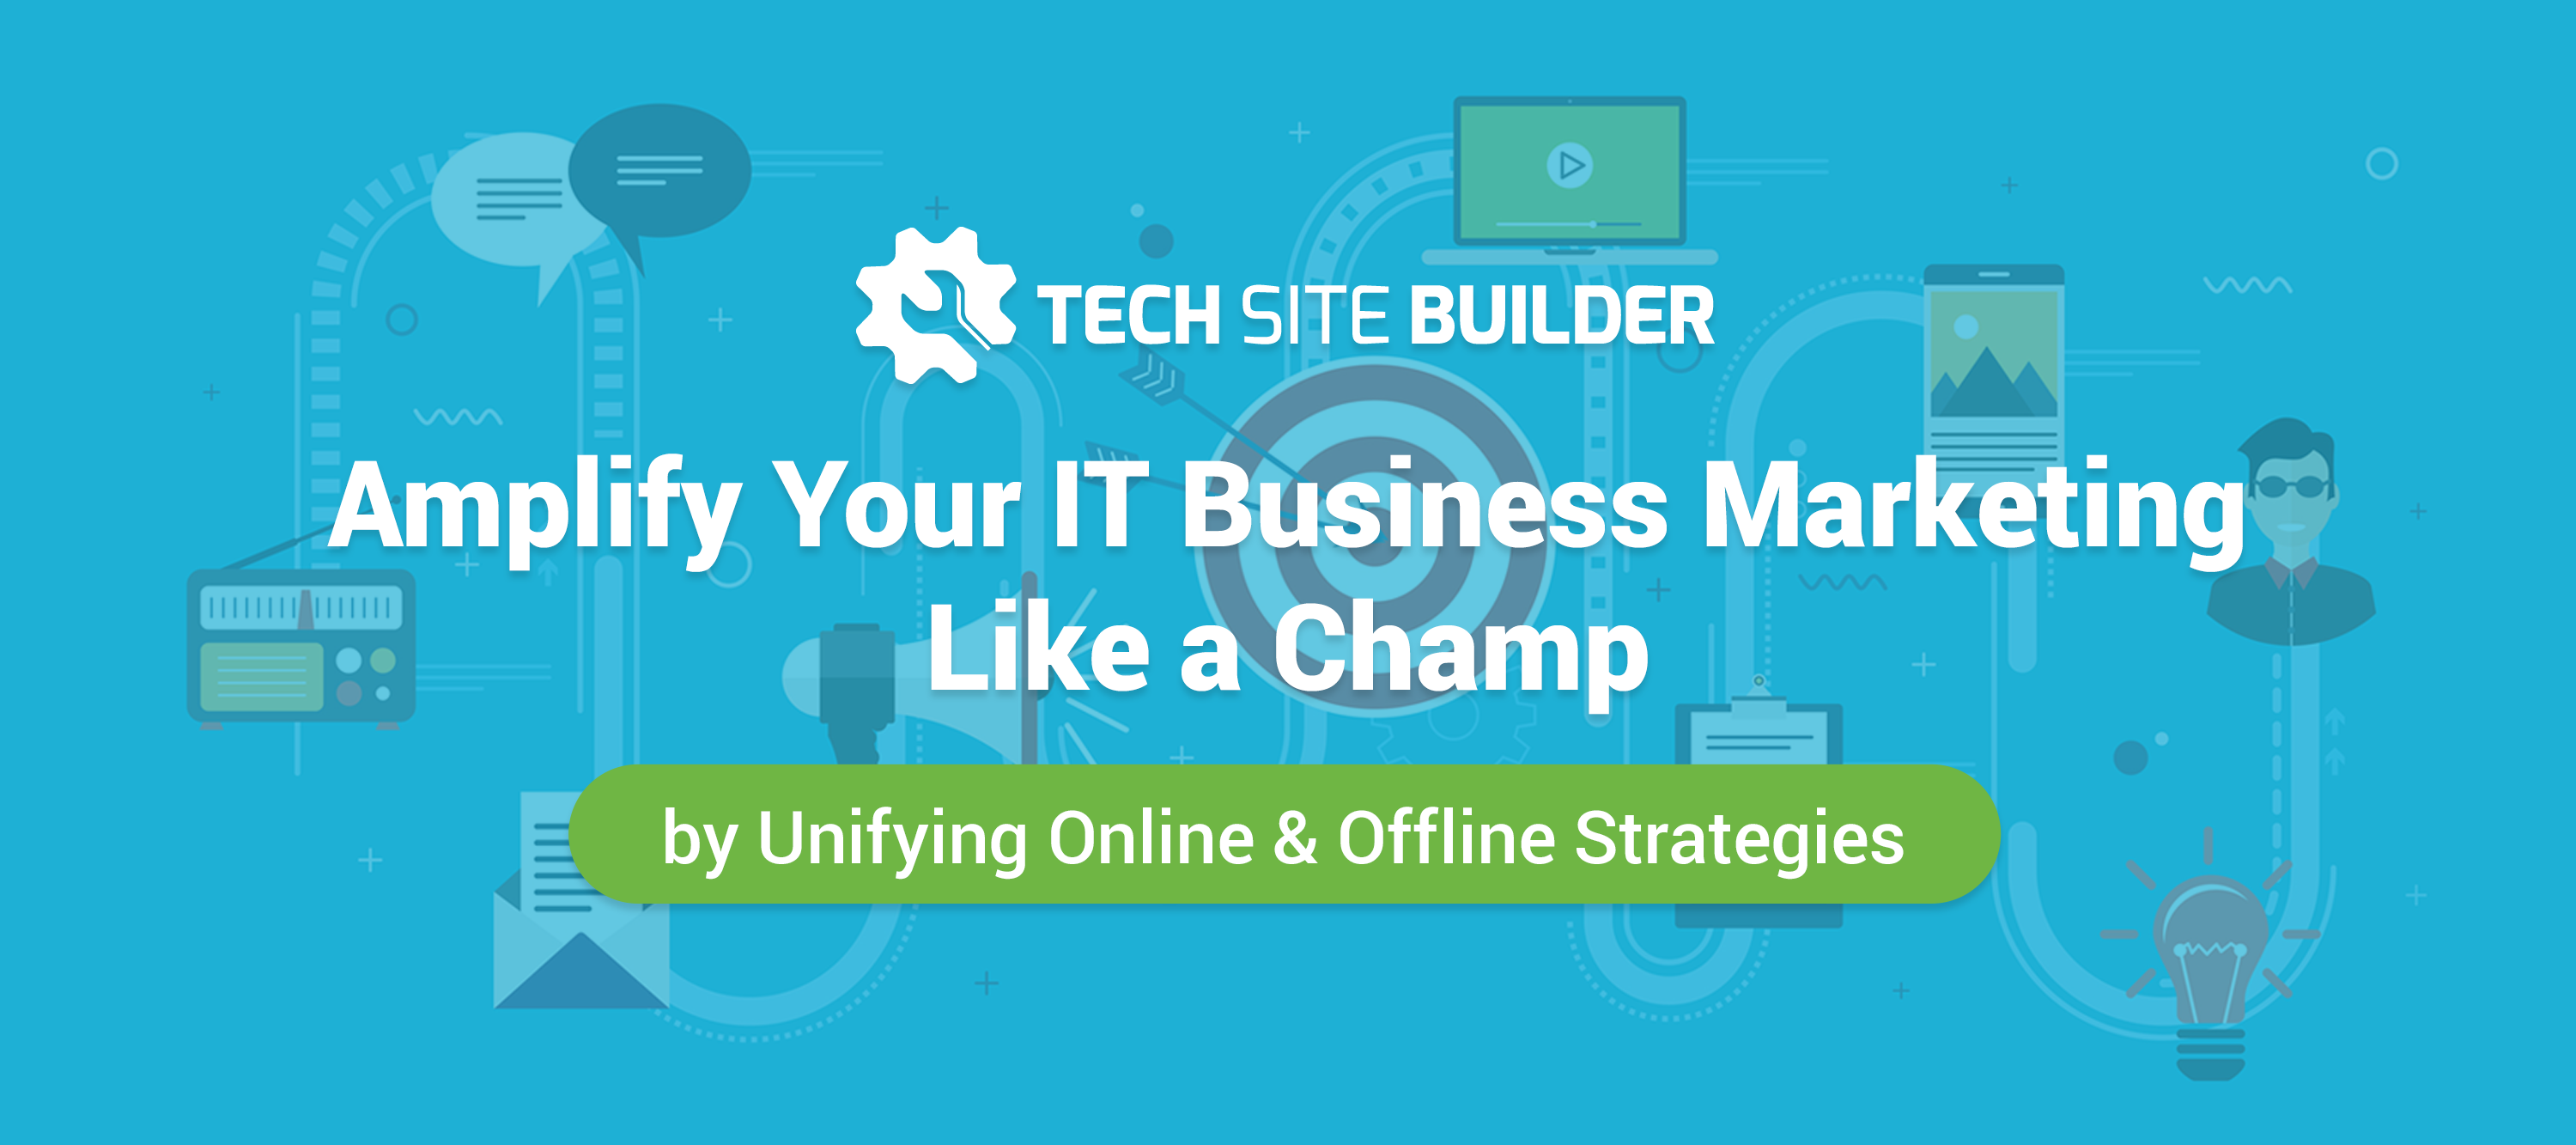 Amplify Your IT Business Marketing Like a Champ by Unifying Online & Offline Strategies